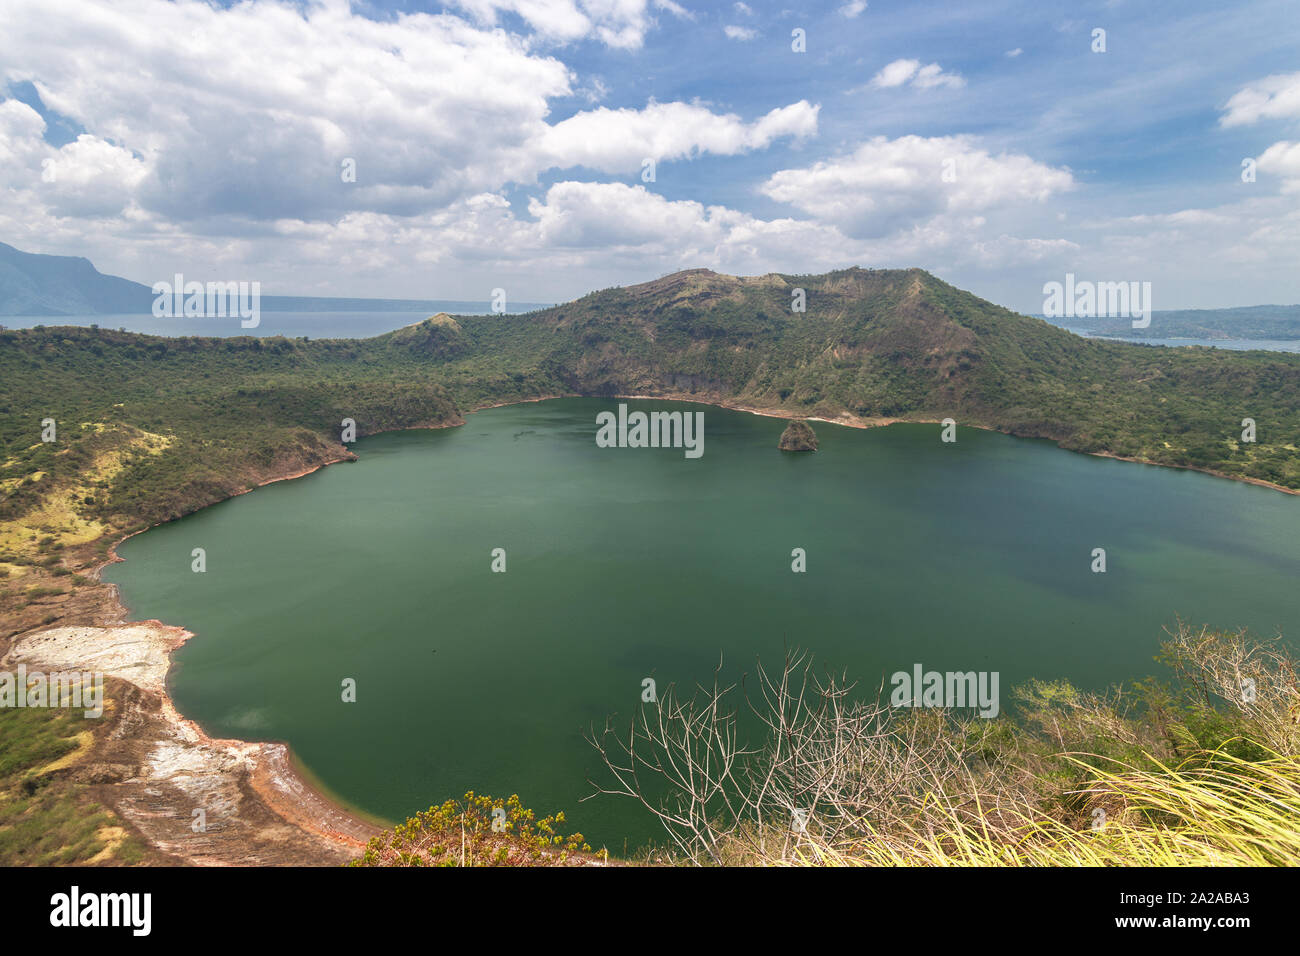 A lake in the crater of a Taal volcano, Batangas, Philippines. Popular tourist destination Stock Photo